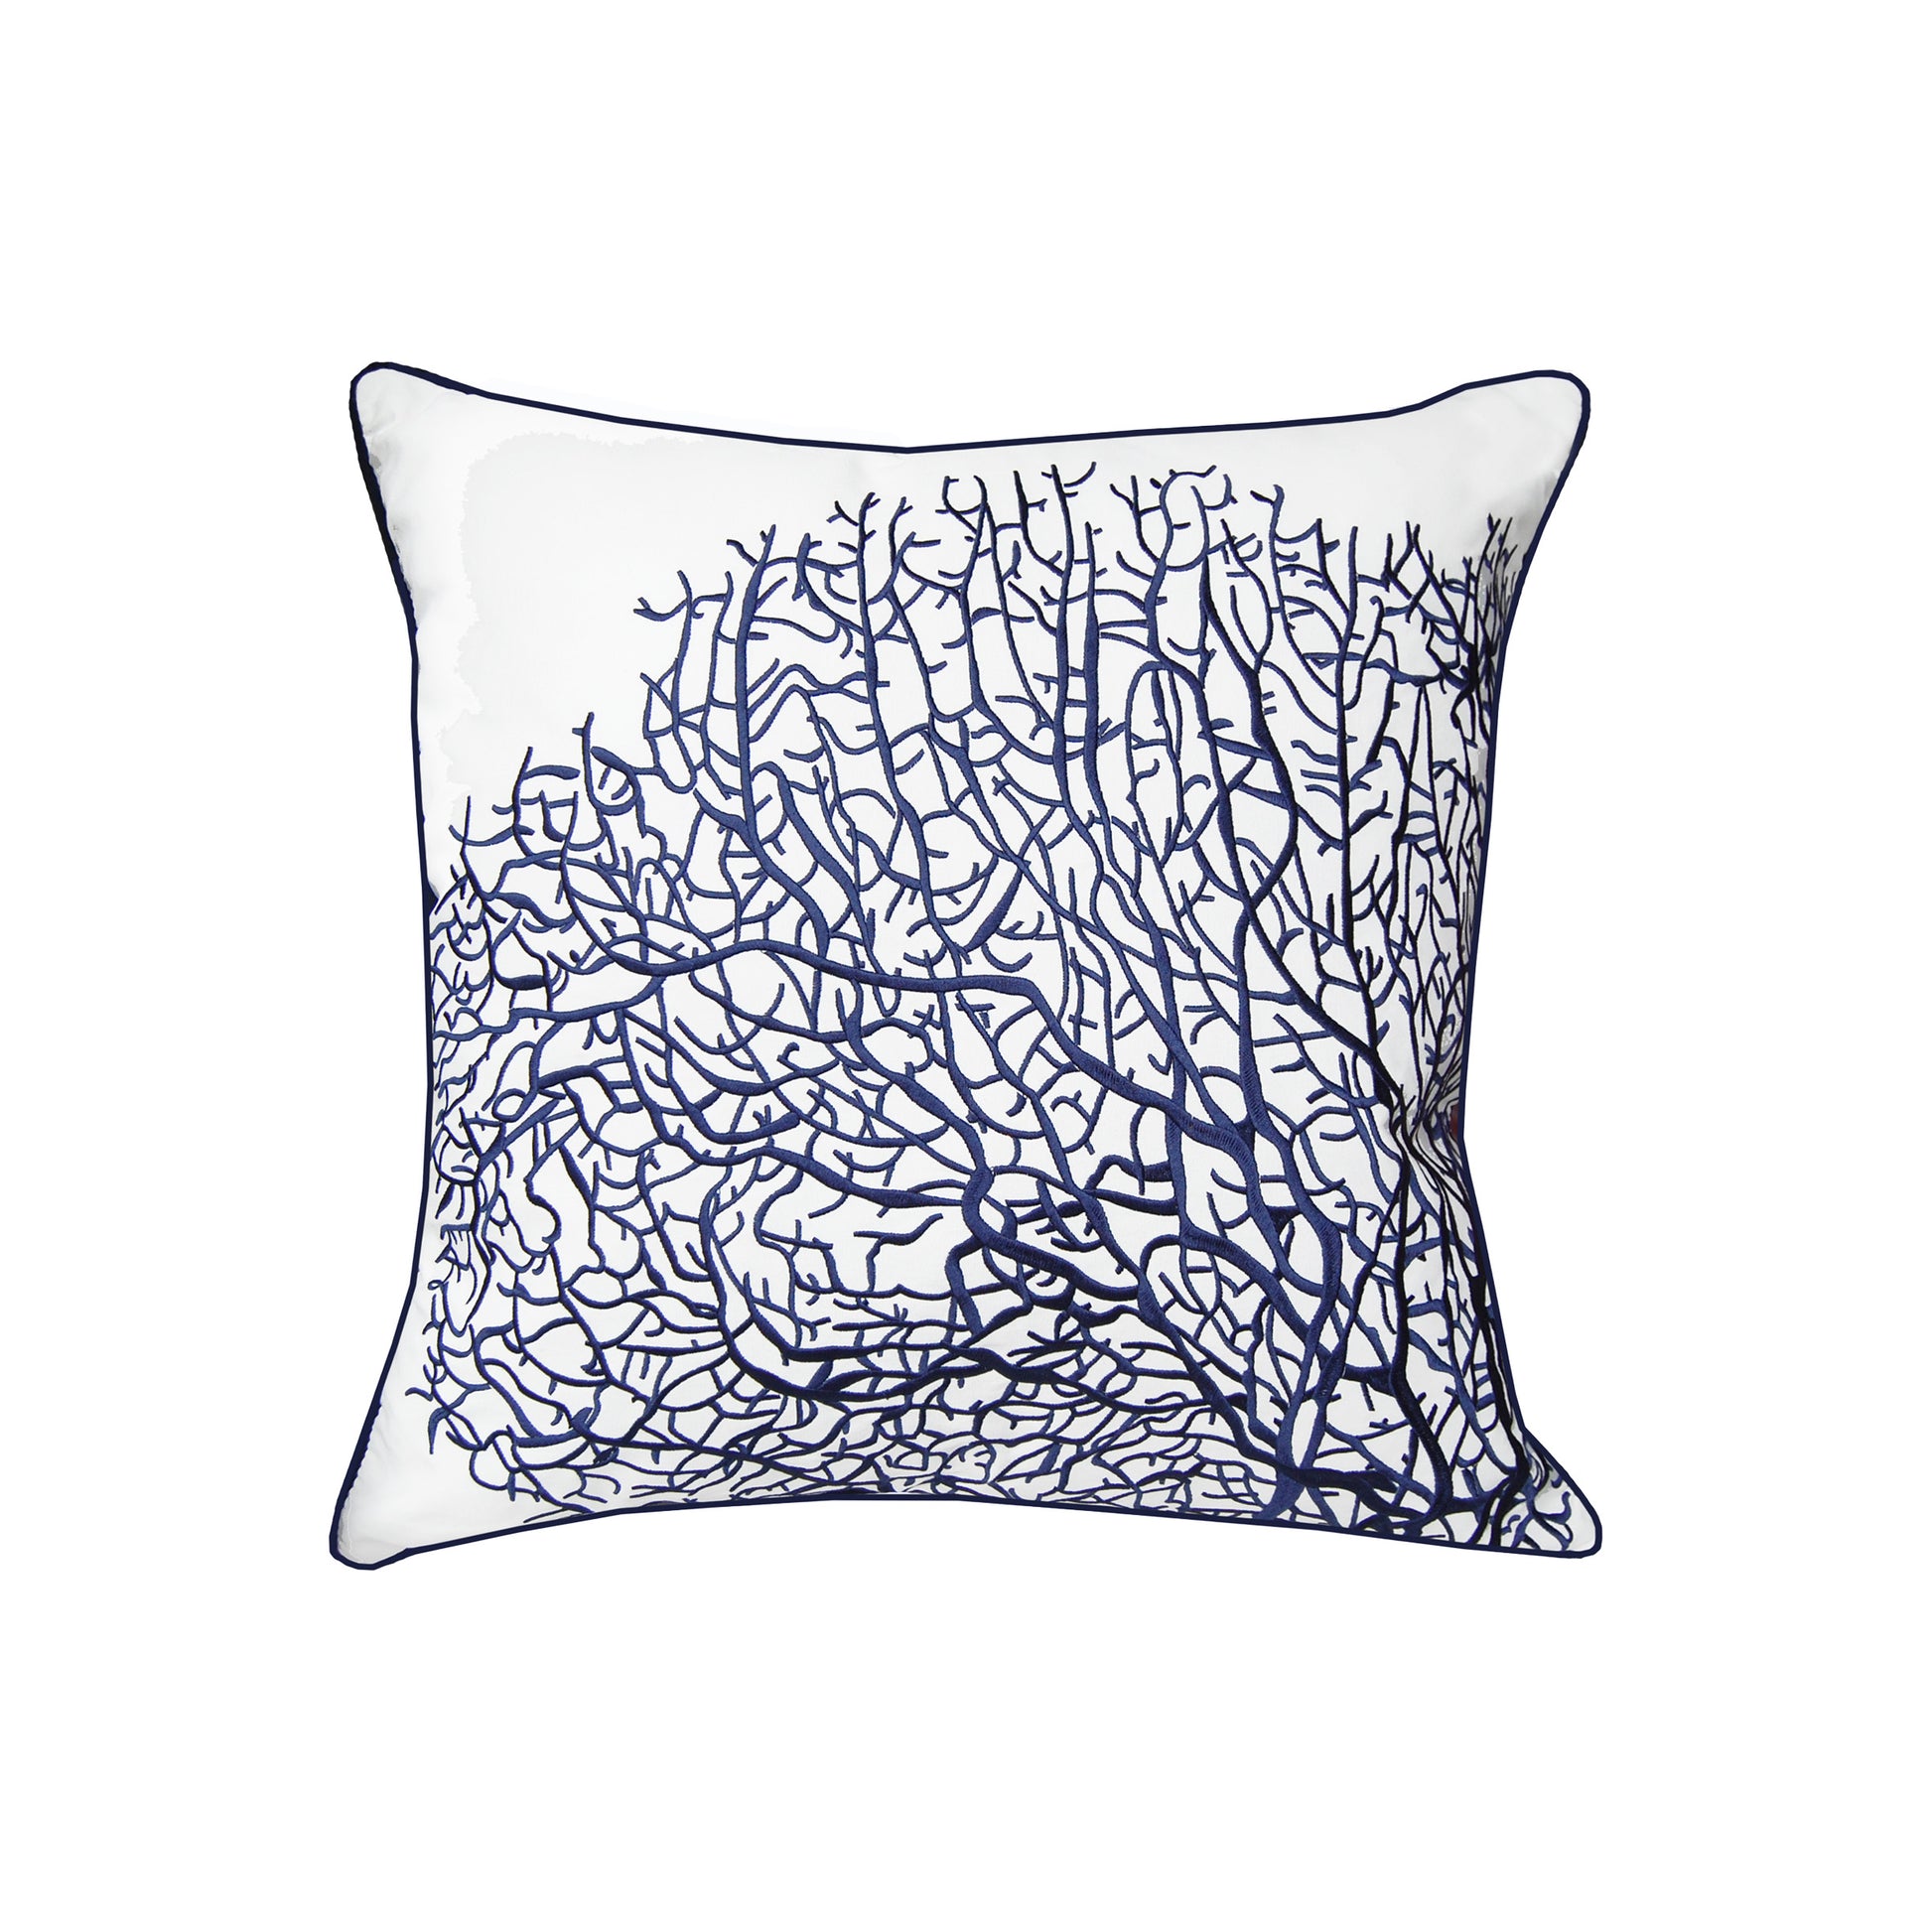 Navy blue sea fan coral embroidered on a white background. The pillow is finished with navy blue piped edging.